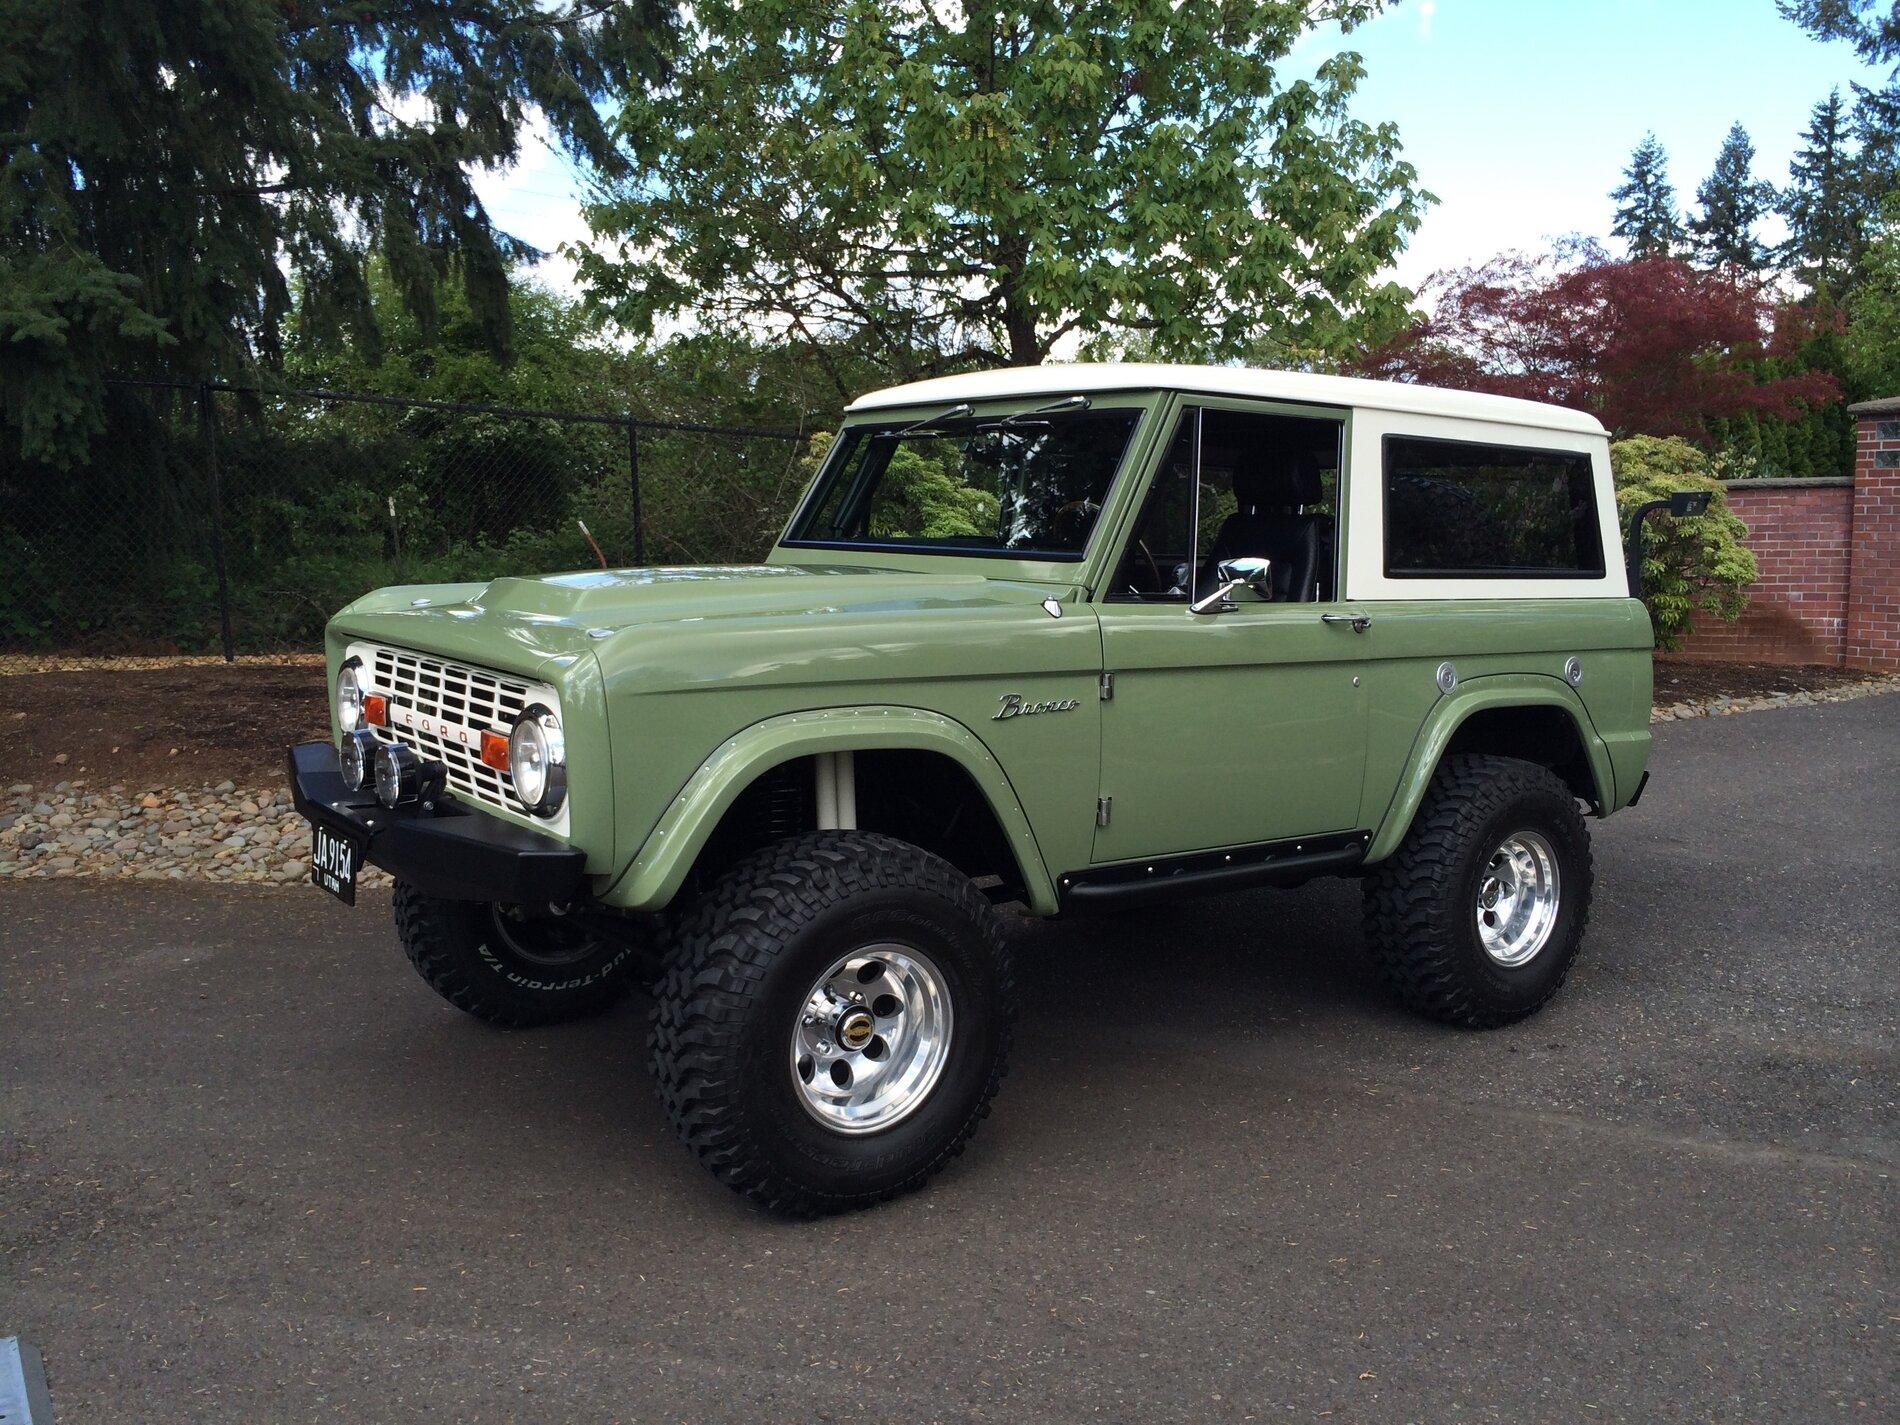 Sage Green / Military Green 6th Gen Bronco Imagined Page 4 Bronco6G